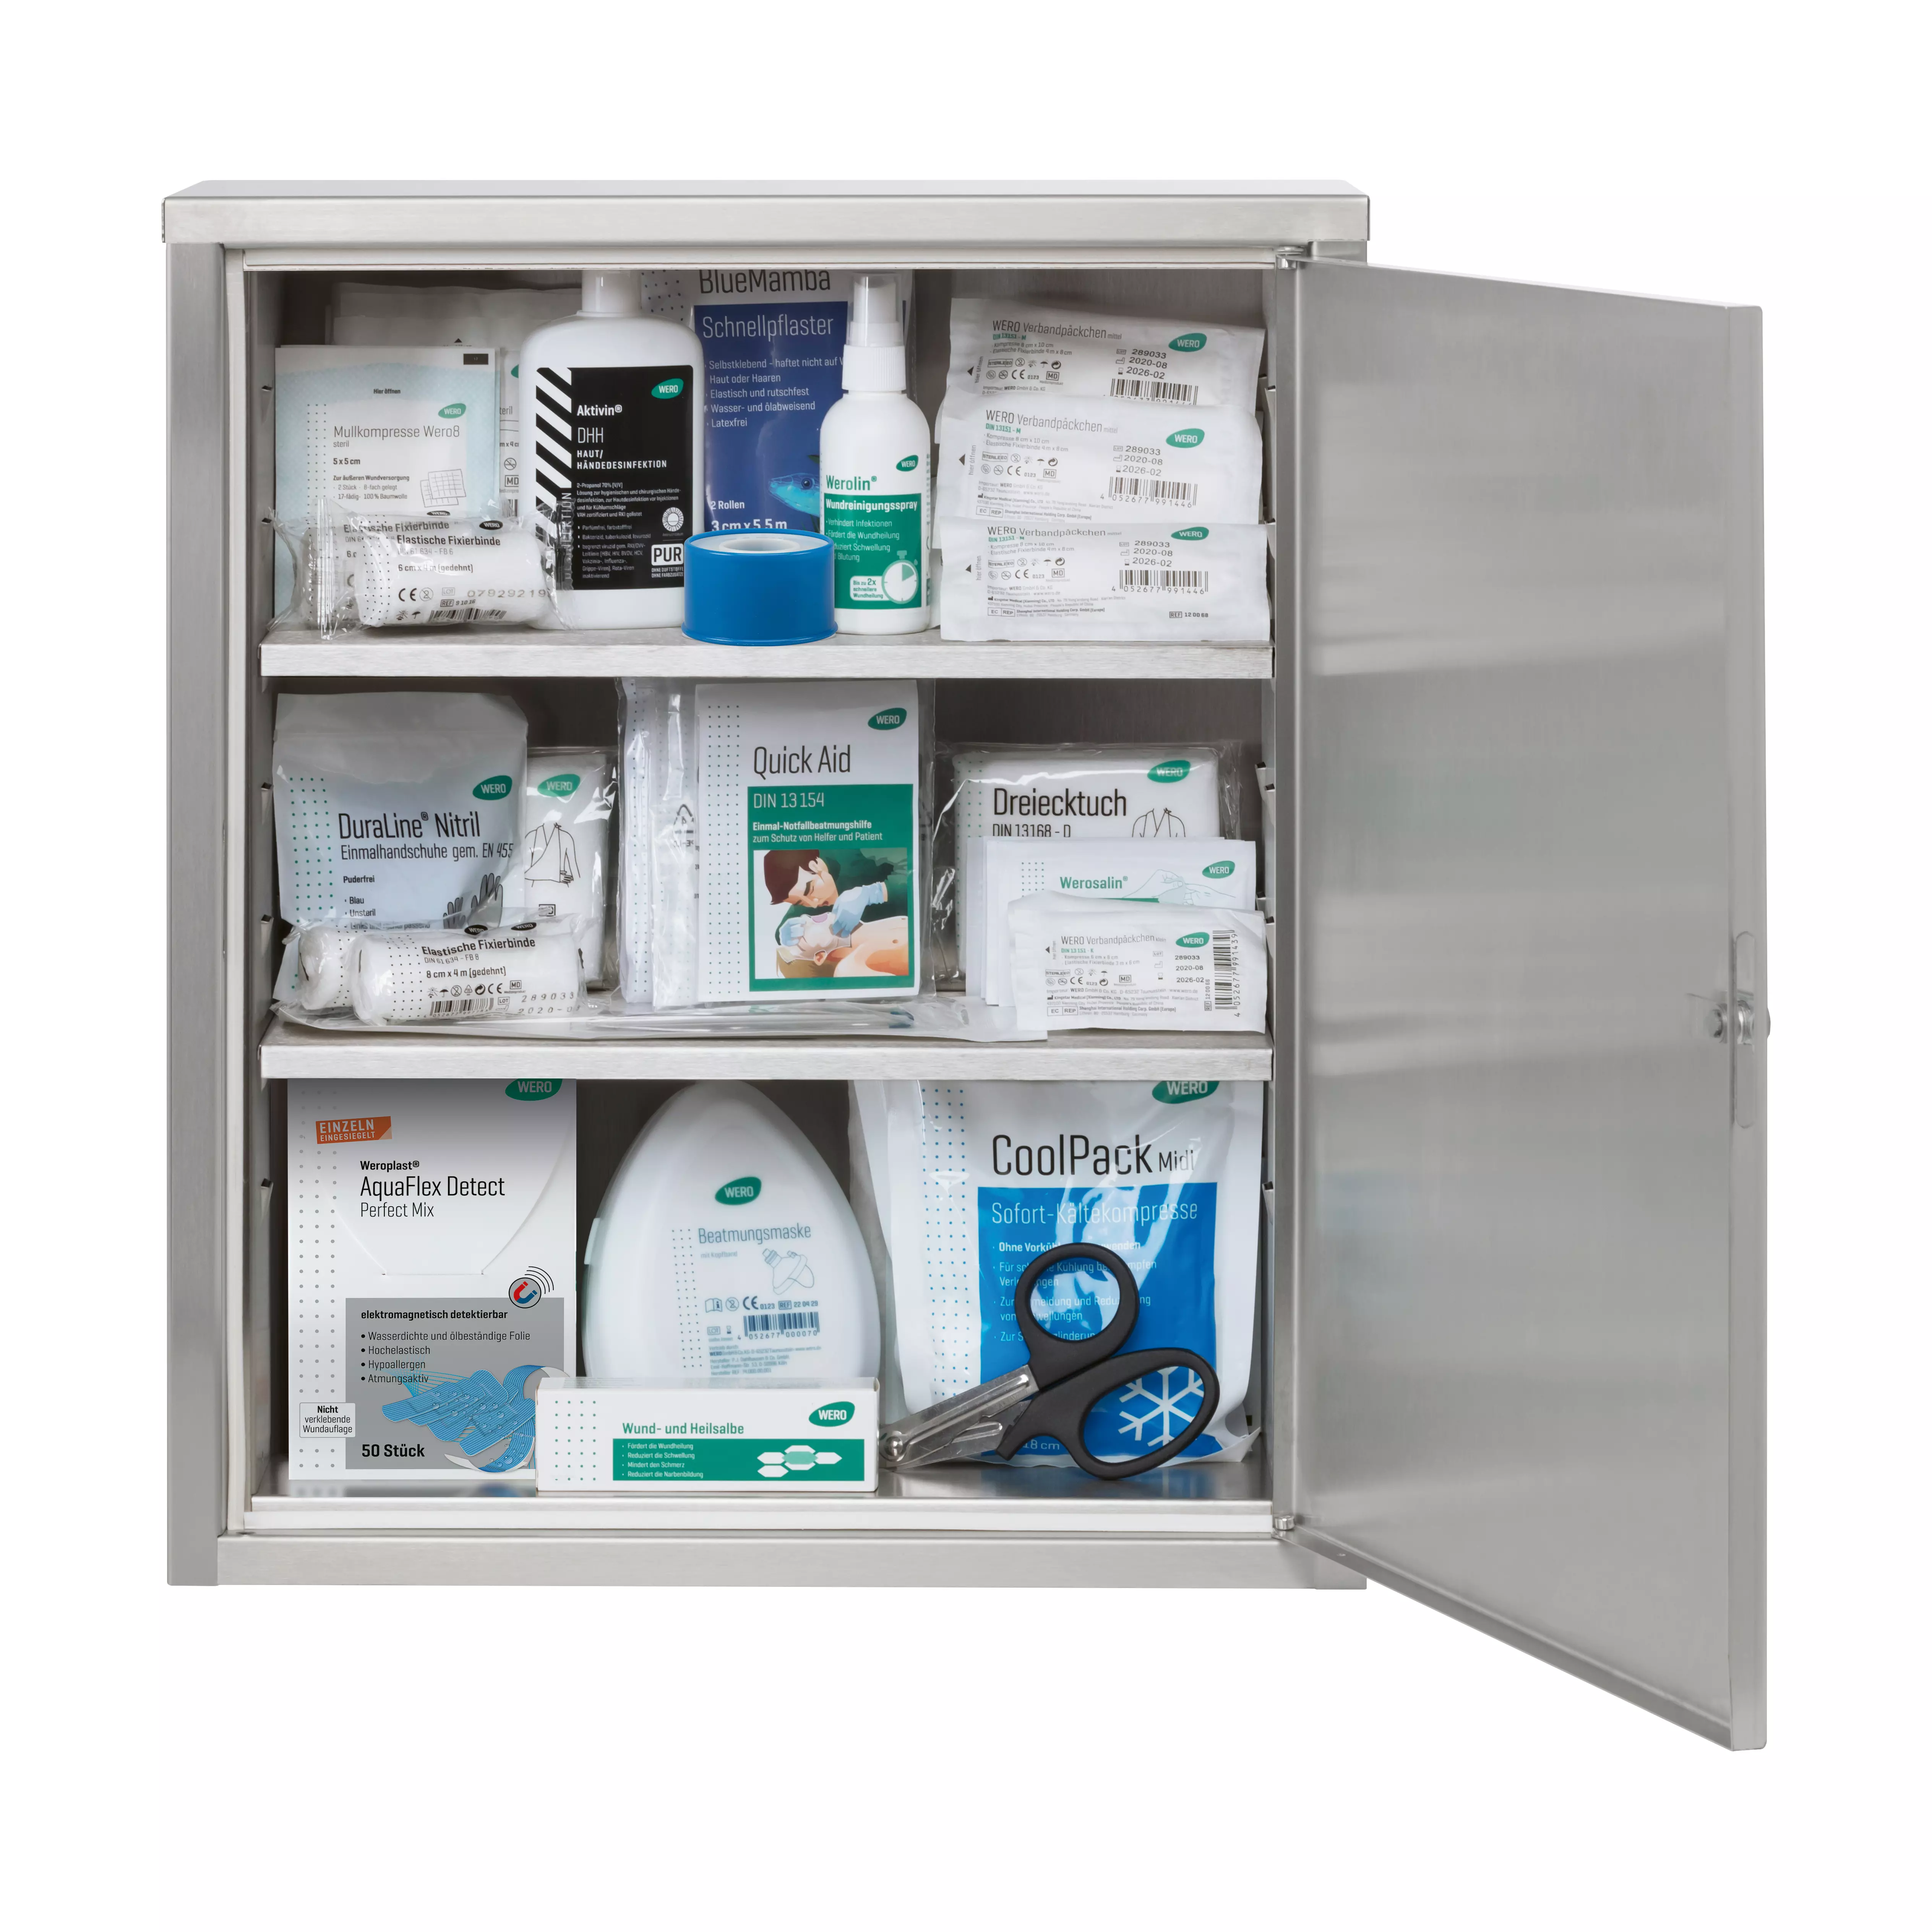 First-aid cabinet Maxi V2A 400, with 2 adjustable shelves